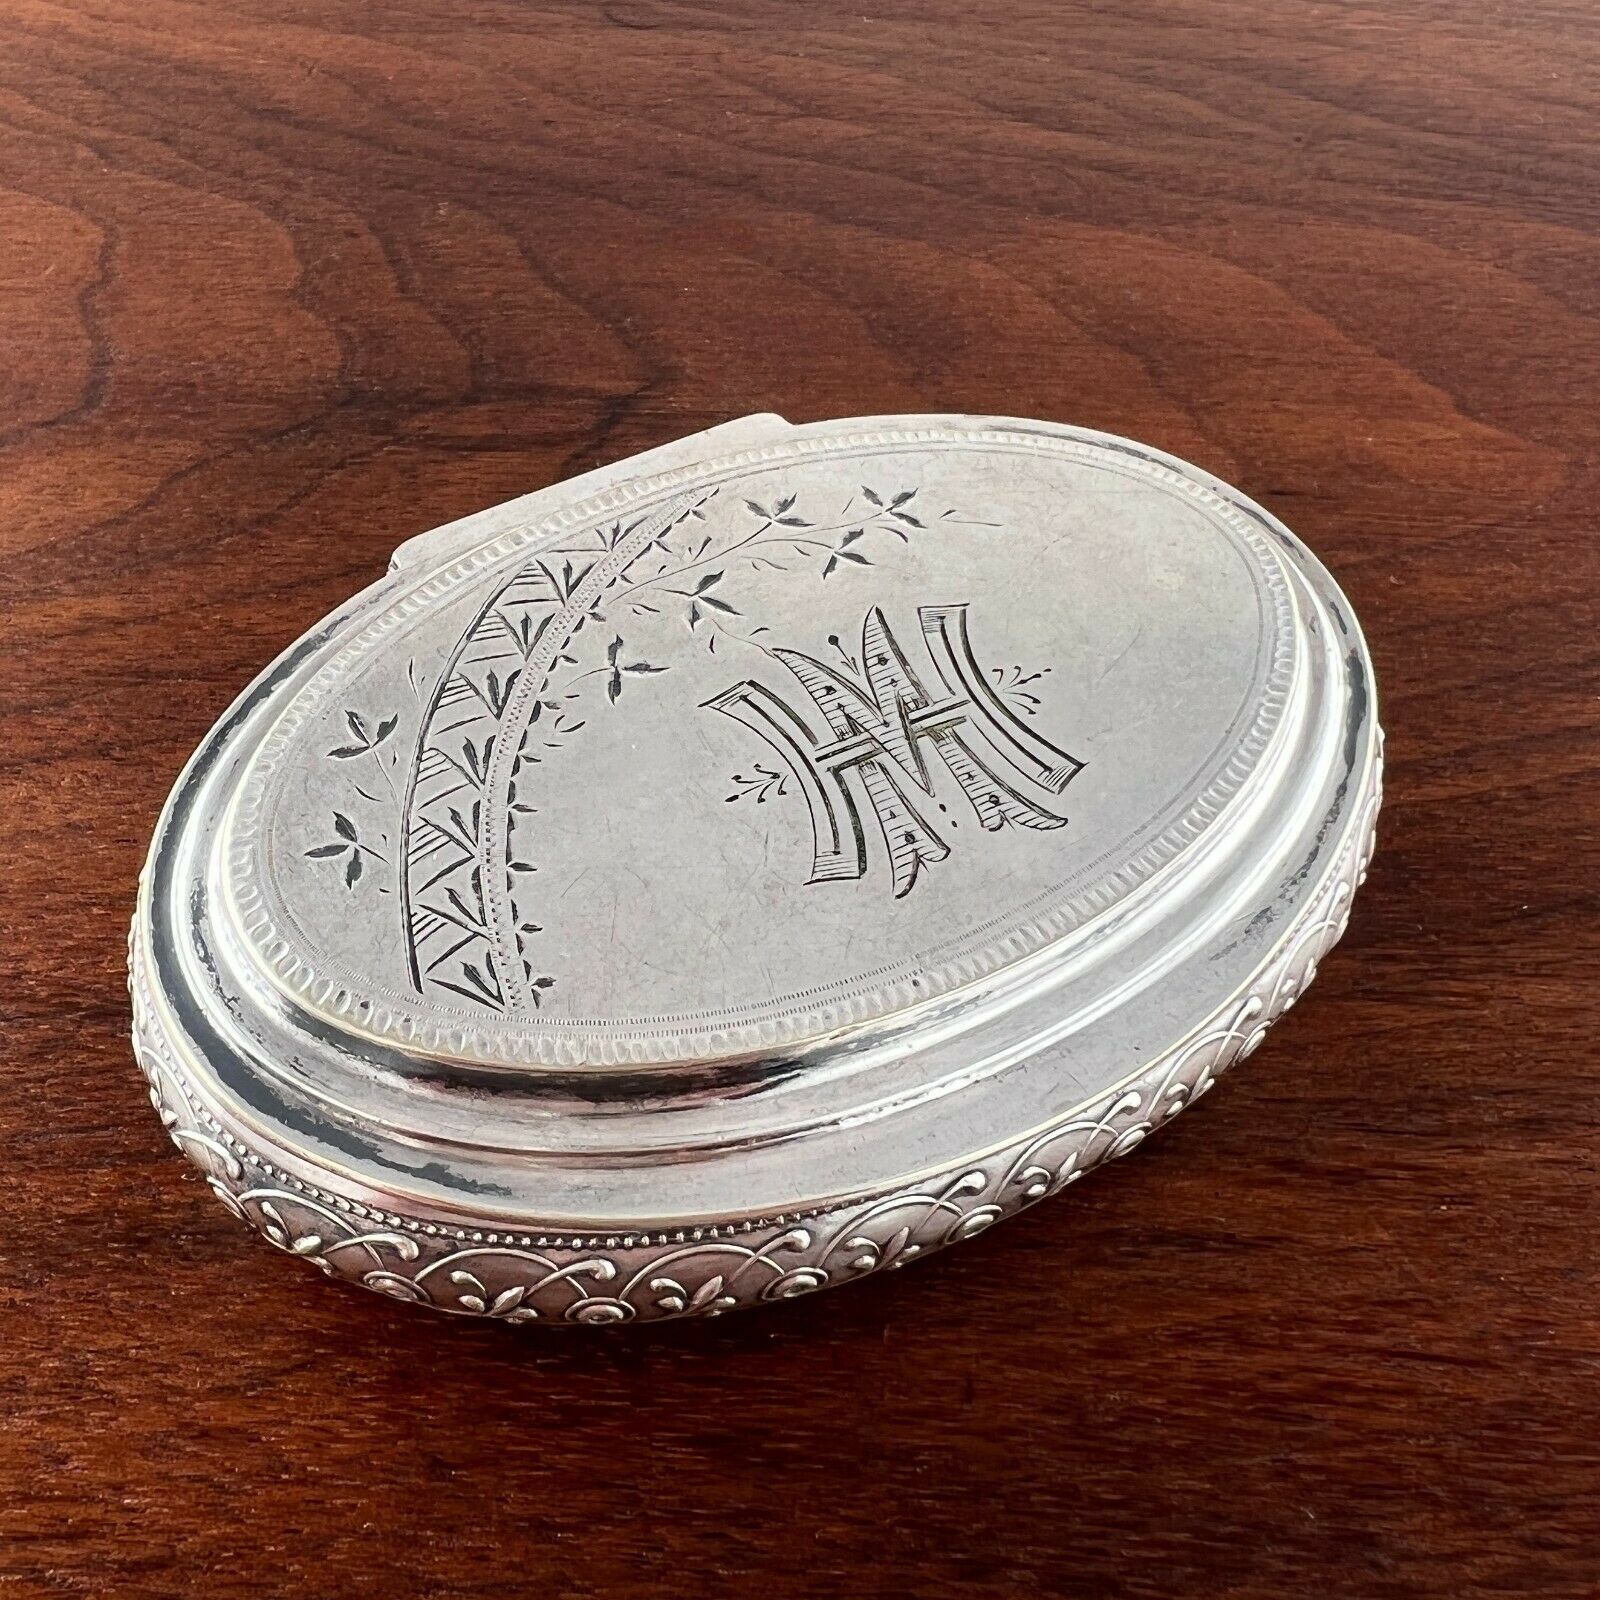 Antique Valuations: LARGE WHITING AMERICAN AESTHETIC COIN SILVER SNUFF BOX BRIGHT CUT FLORAL 1870S